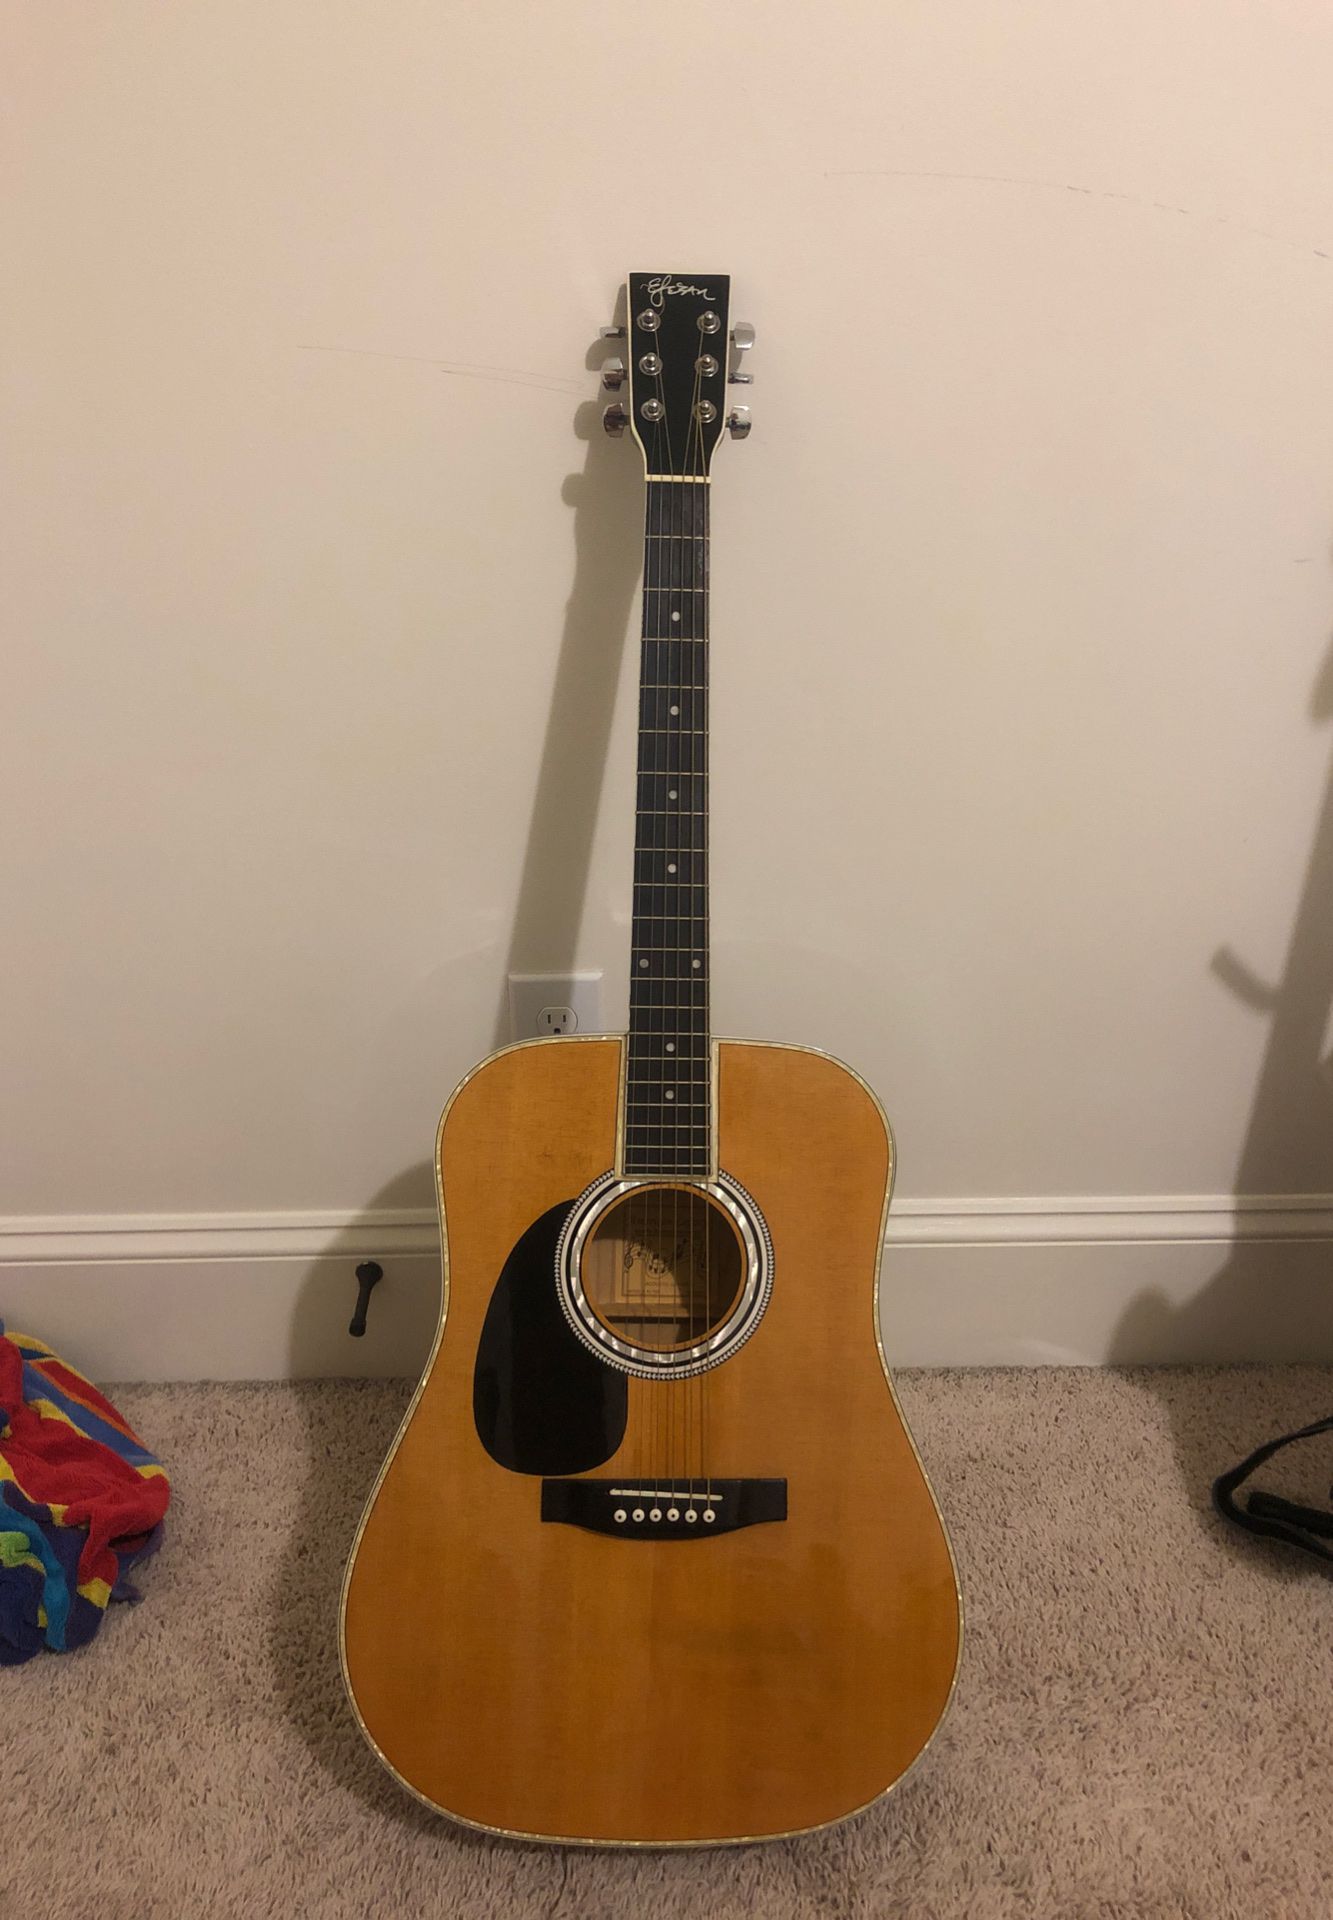 Acoustic guitar (left handed with plugins)